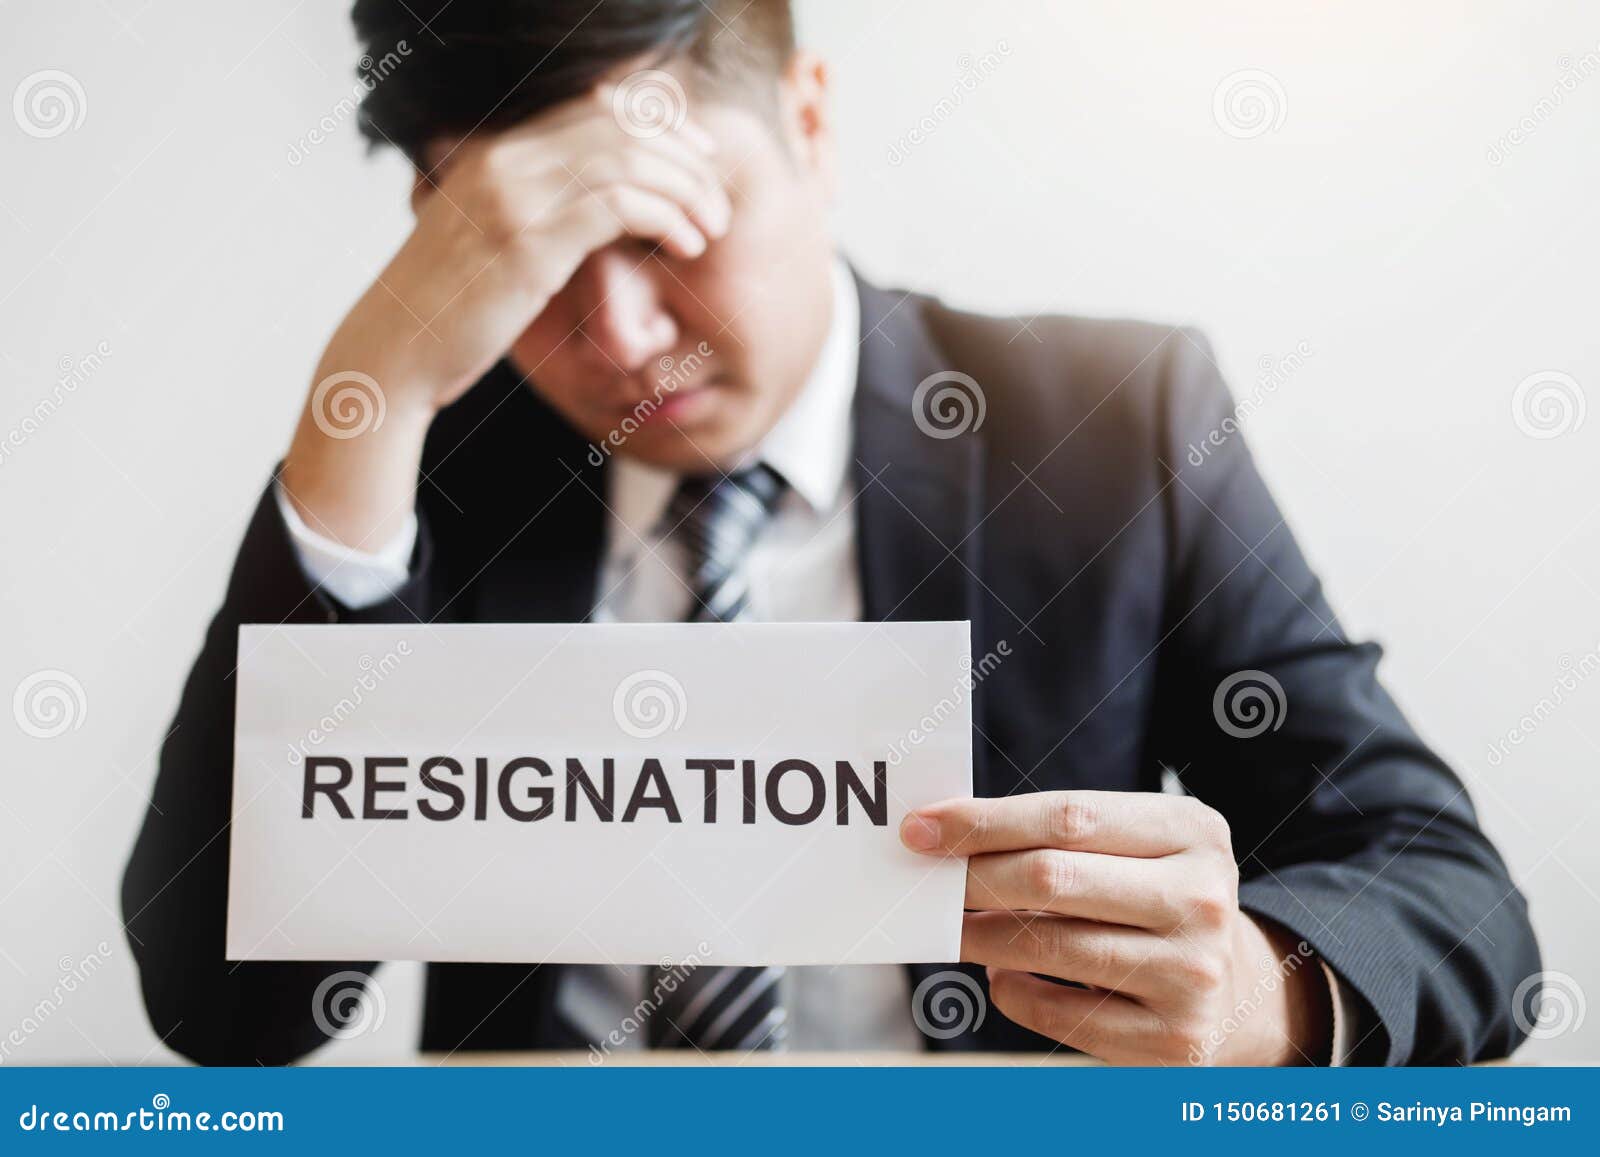 business man stressing with resignation letter for quit a job packing the box and leaving the office , resignation concept